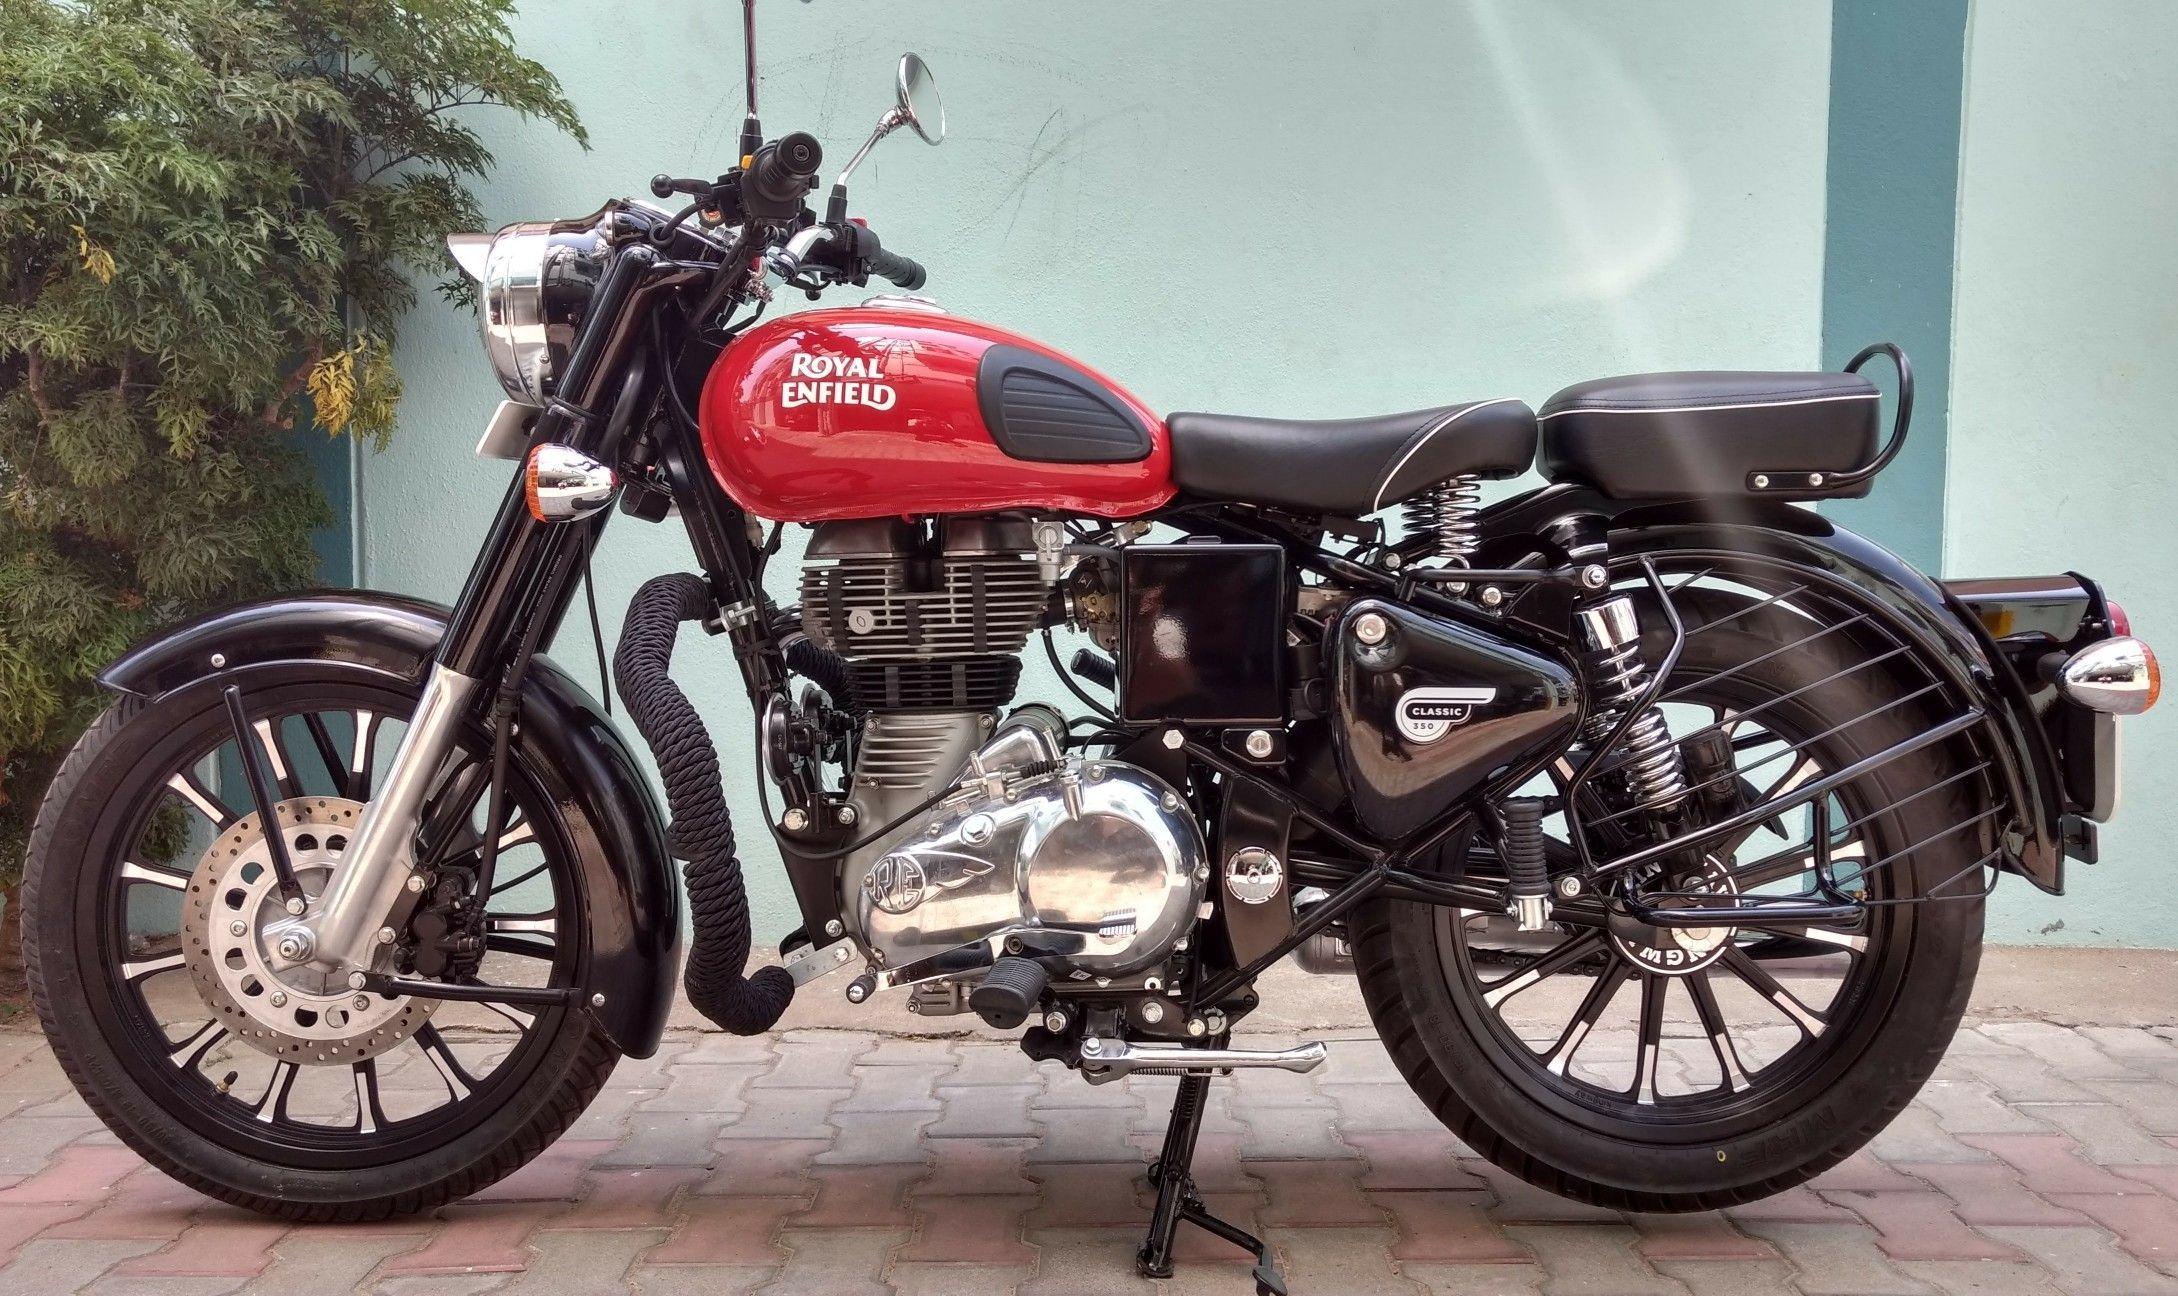 Red Royal Enfield Wallpapers